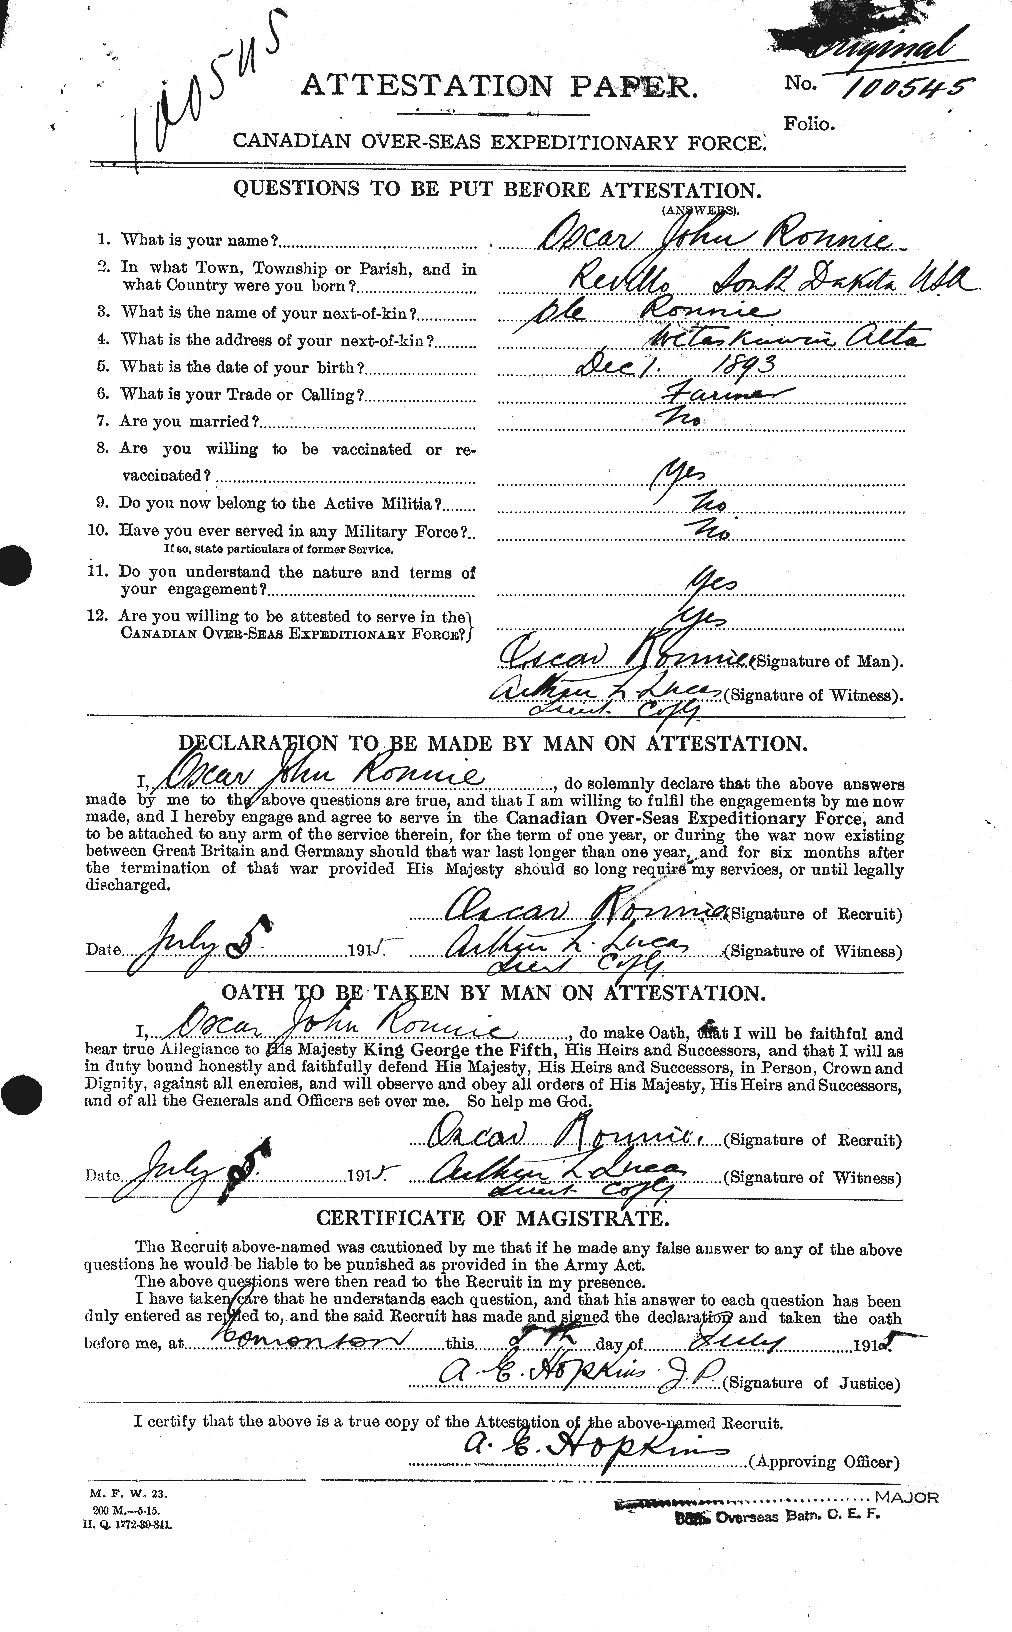 Personnel Records of the First World War - CEF 613801a